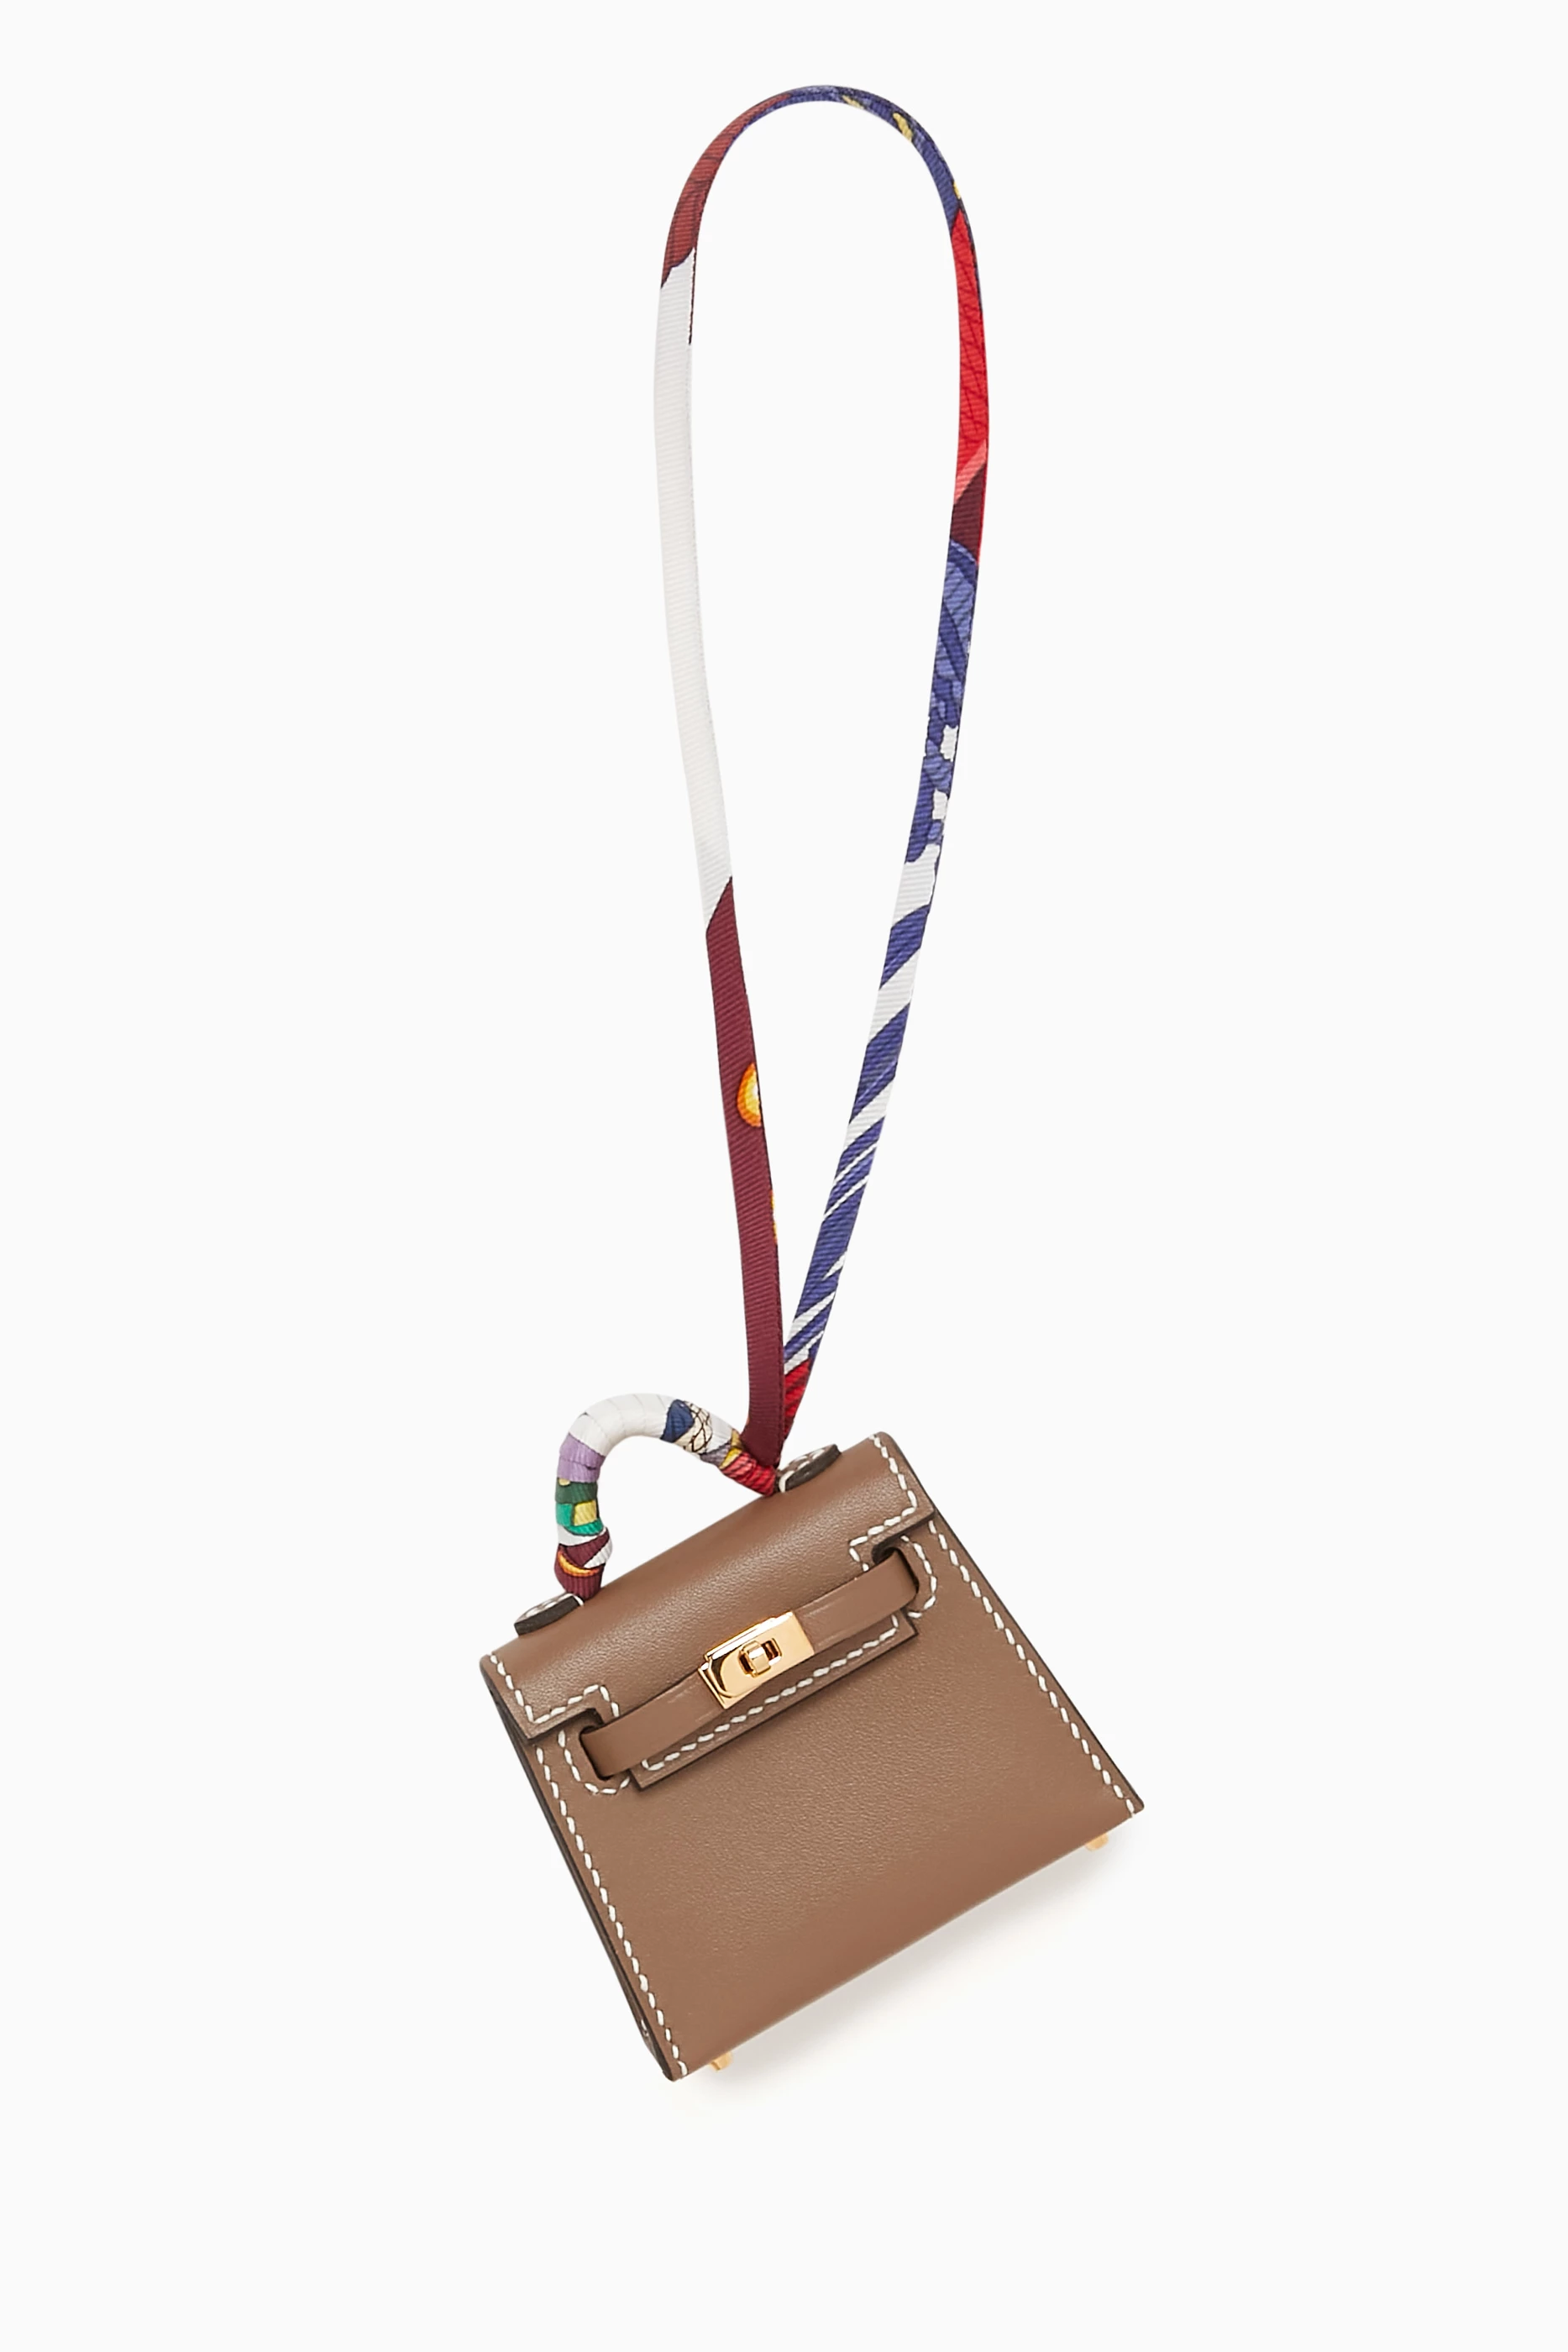 The Hermes Micro Kelly Charm is from the very hard to get nano charms  released by Hermès in 2020. Used as a bag charm, or maybe as a…